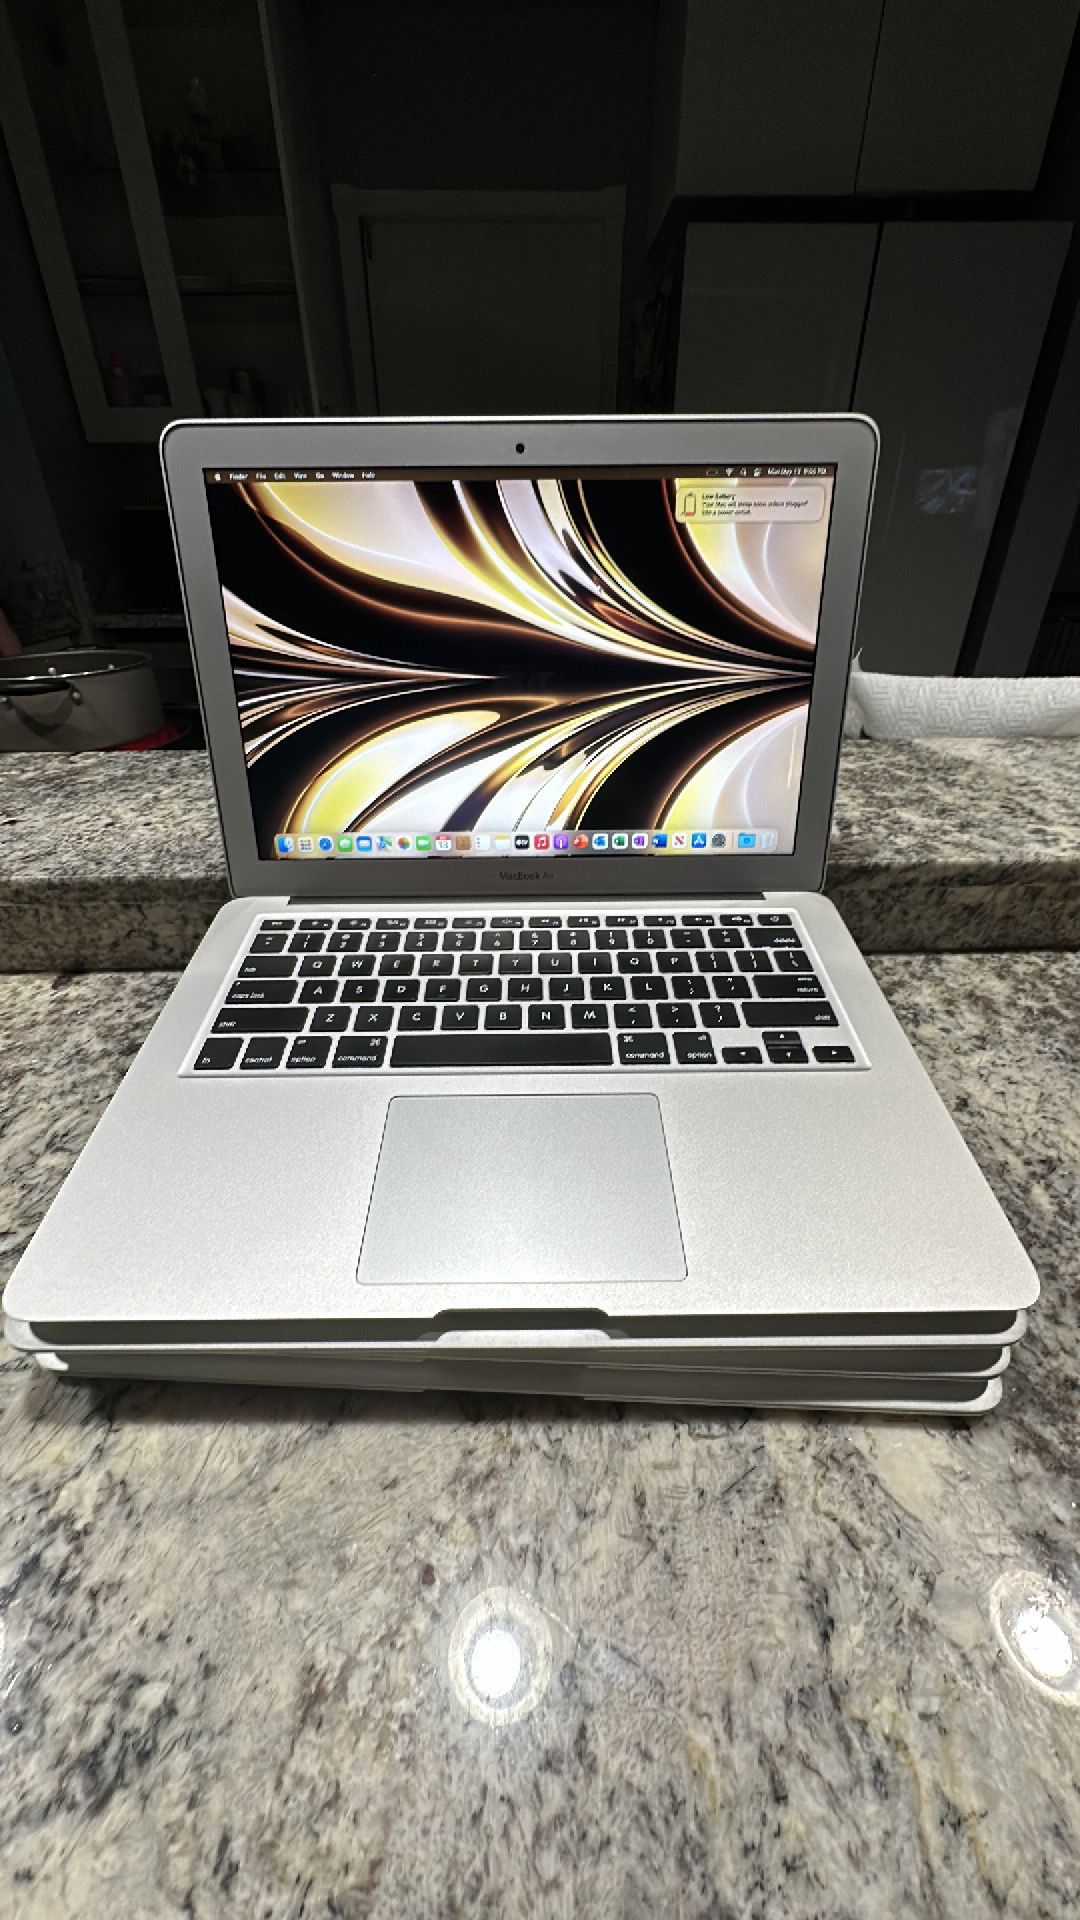 APPLE MACBOOK AIR 13” INTEL CORE i5/ LOADED WITH  OFFICE 